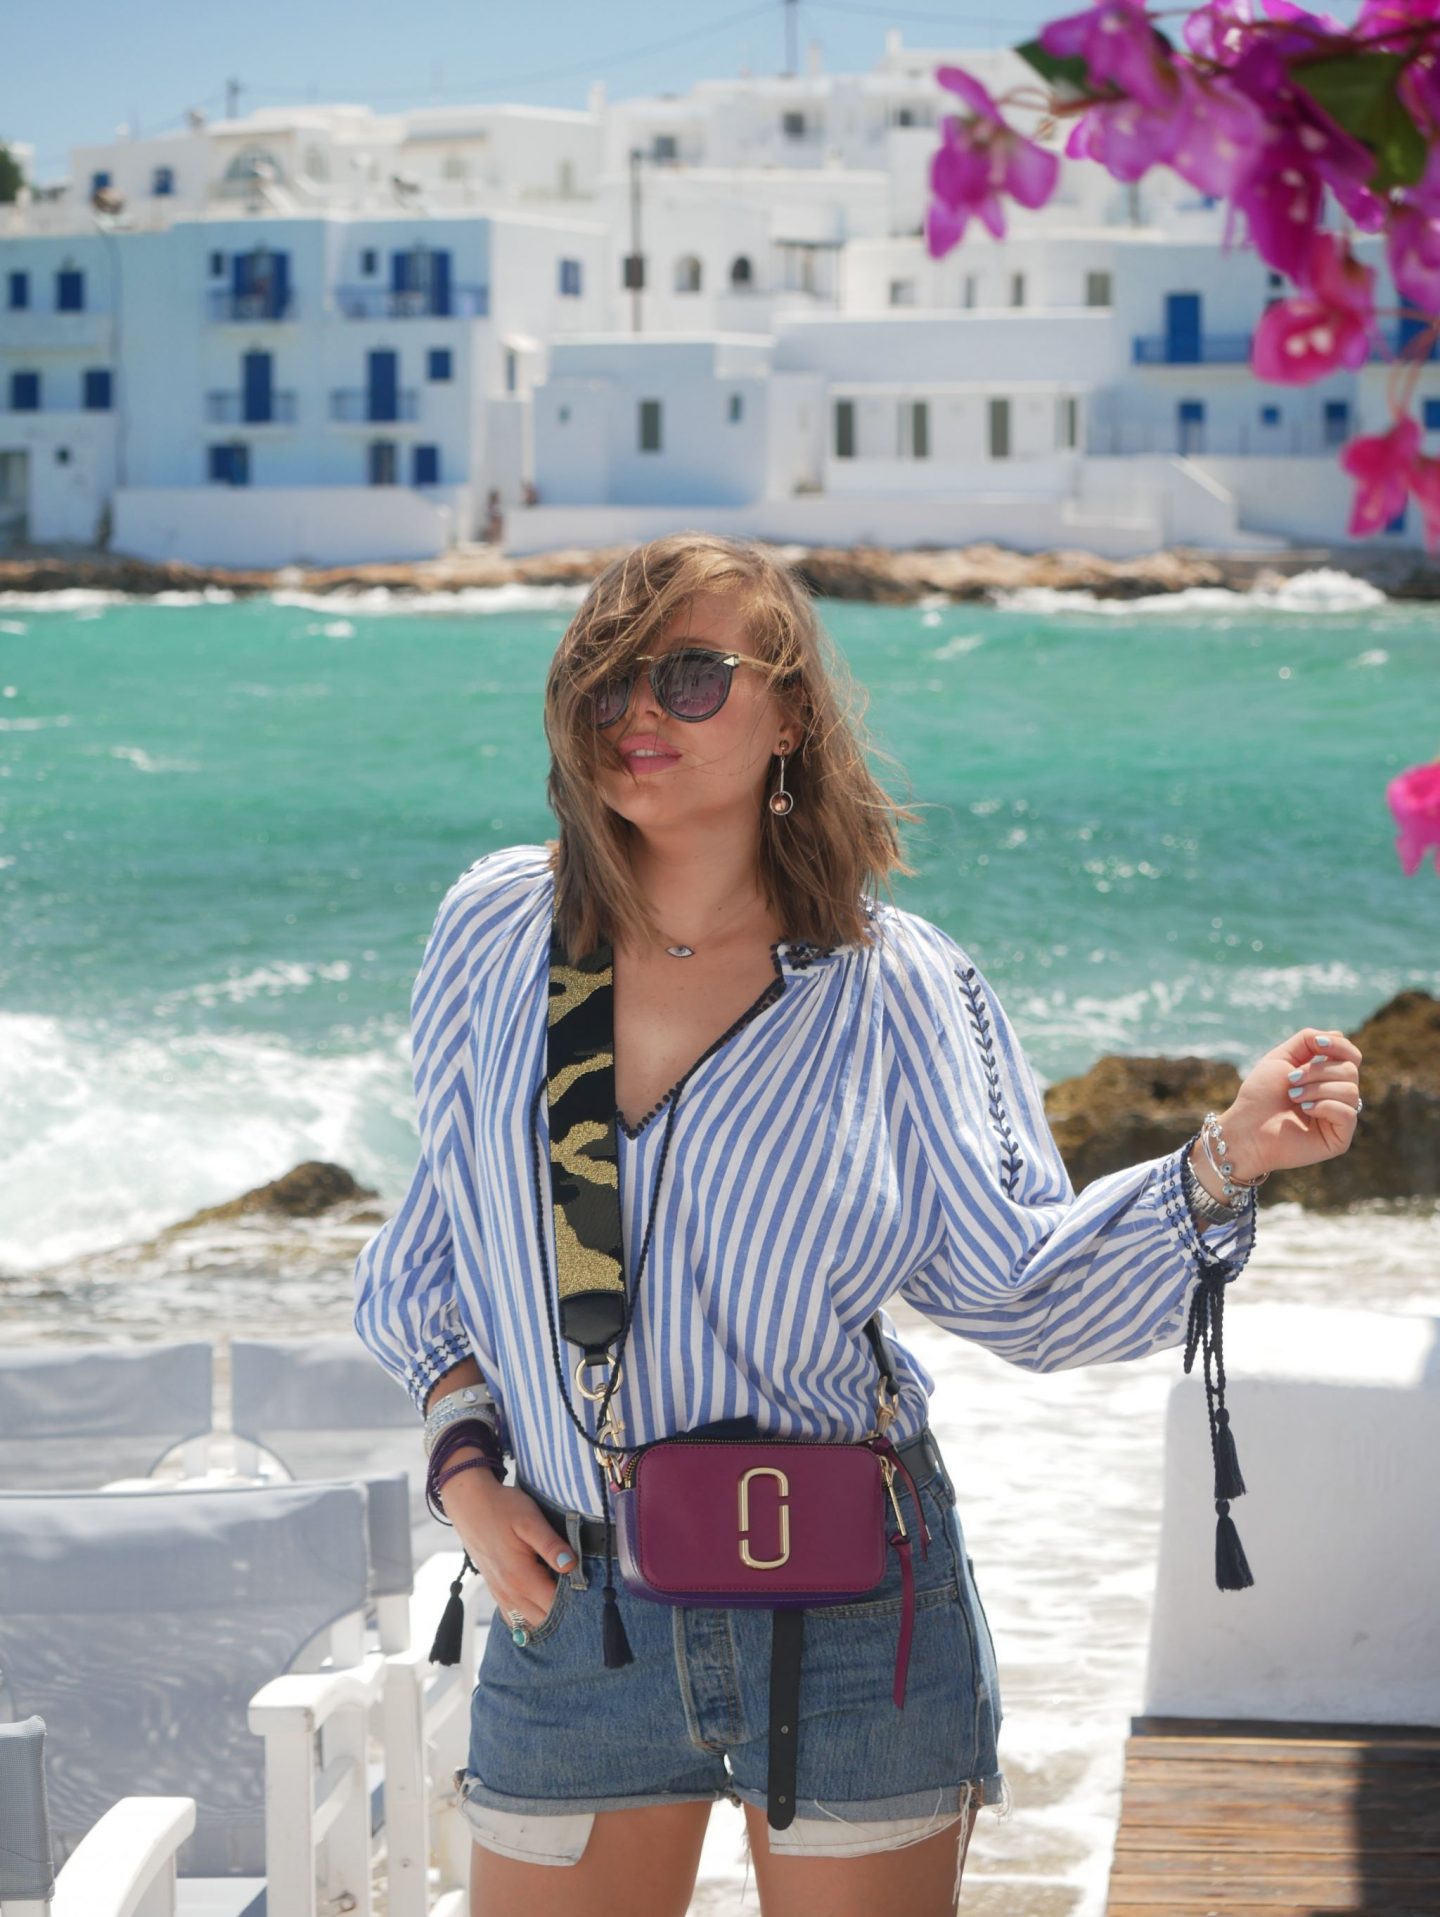 manchester fashion blogger, manchester fashion , Mykonos , Greece , Travel guide to Mykonos, Travel guide 